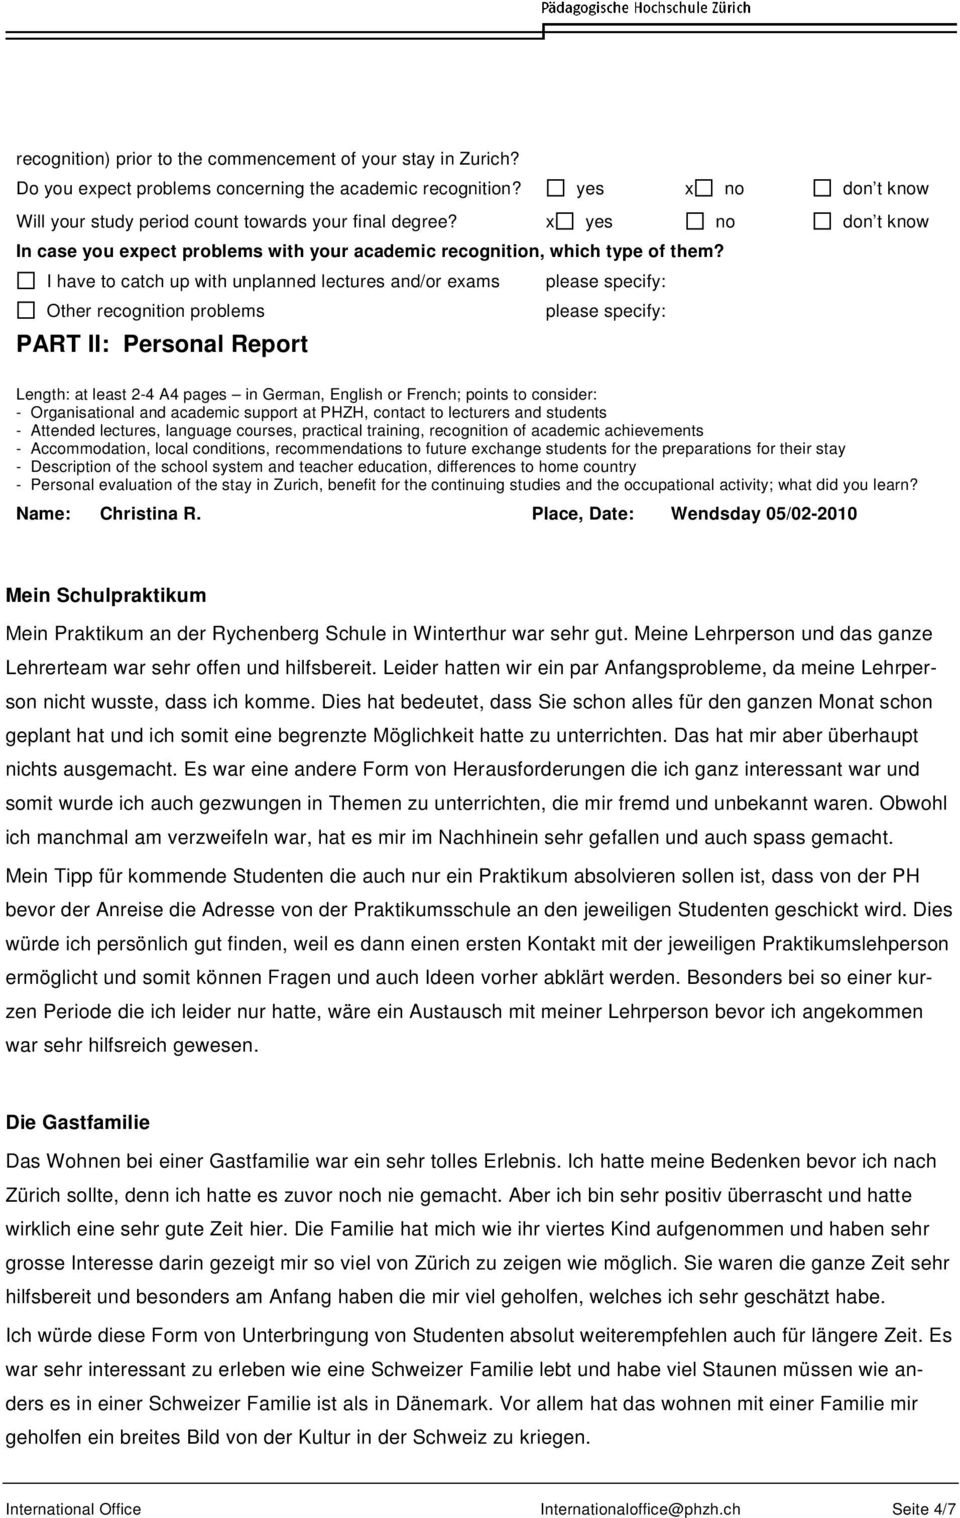 I have to catch up with unplanned lectures and/or eams Other recognition problems PART II: Personal Report please specify: please specify: Length: at least 2-4 A4 pages in German, English or French;